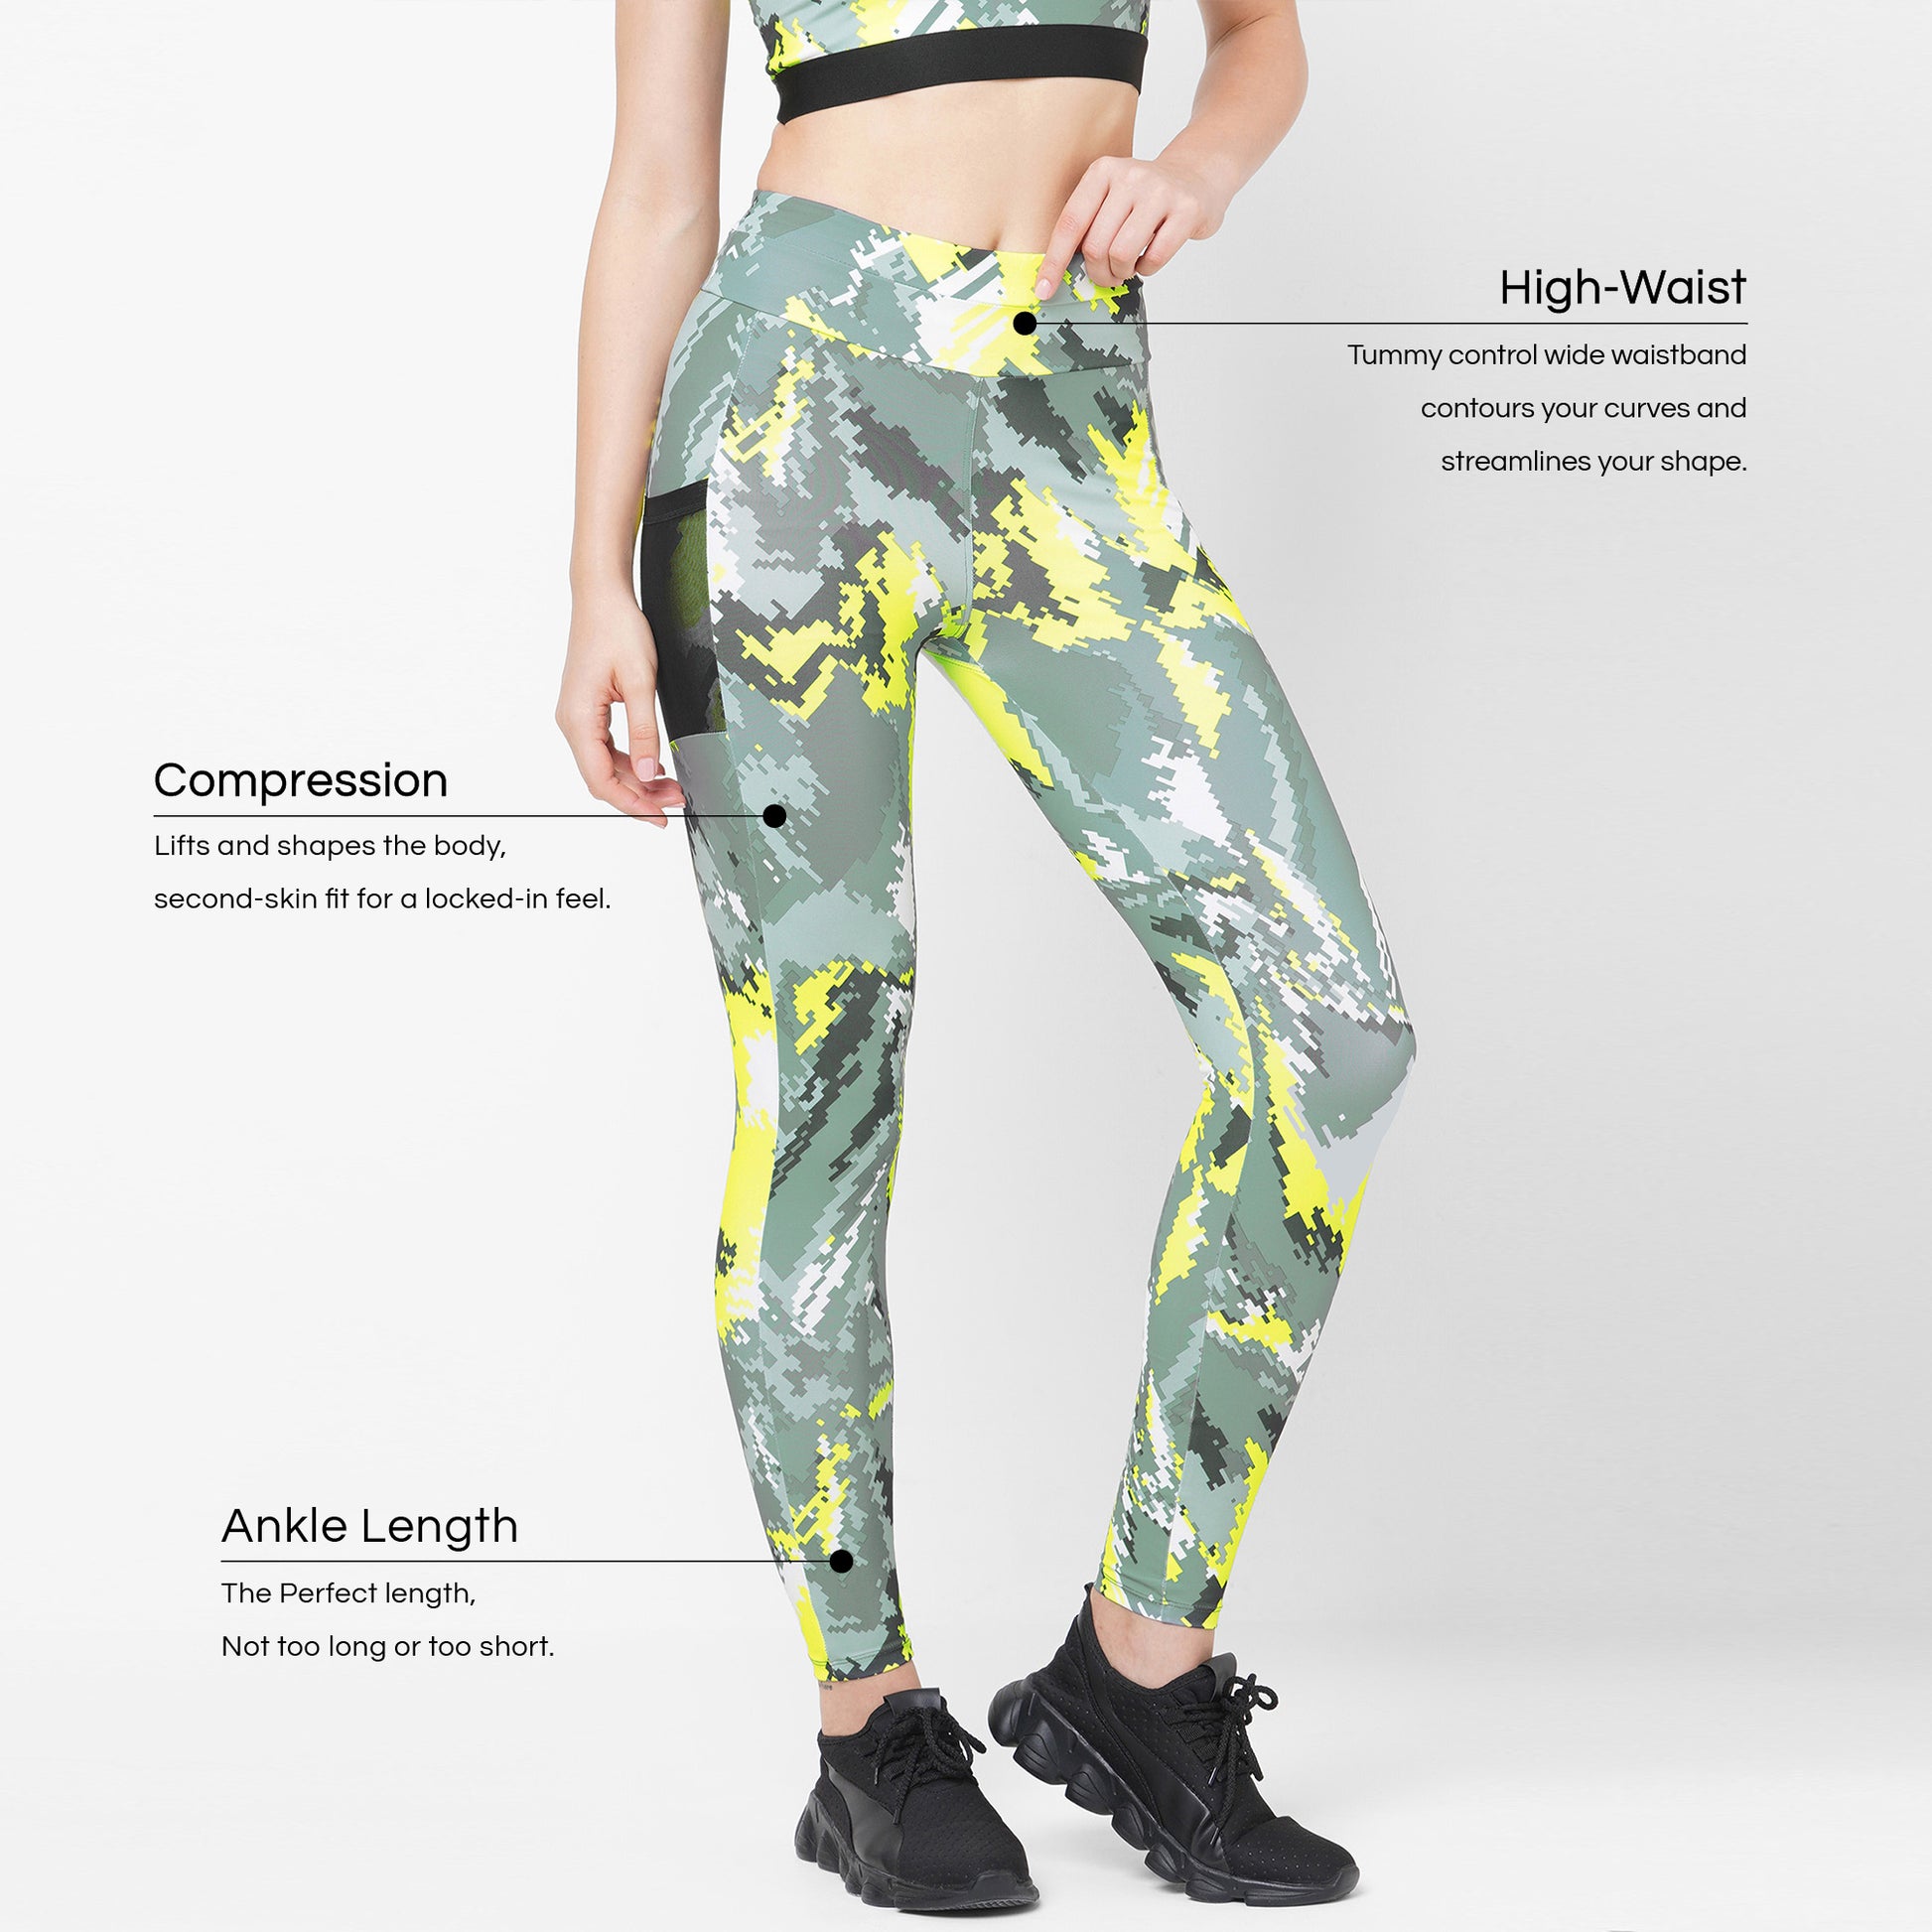 JUST-DRY 7/8 High Waist Camo Printed Workout Tights for Women – Laasa Sports